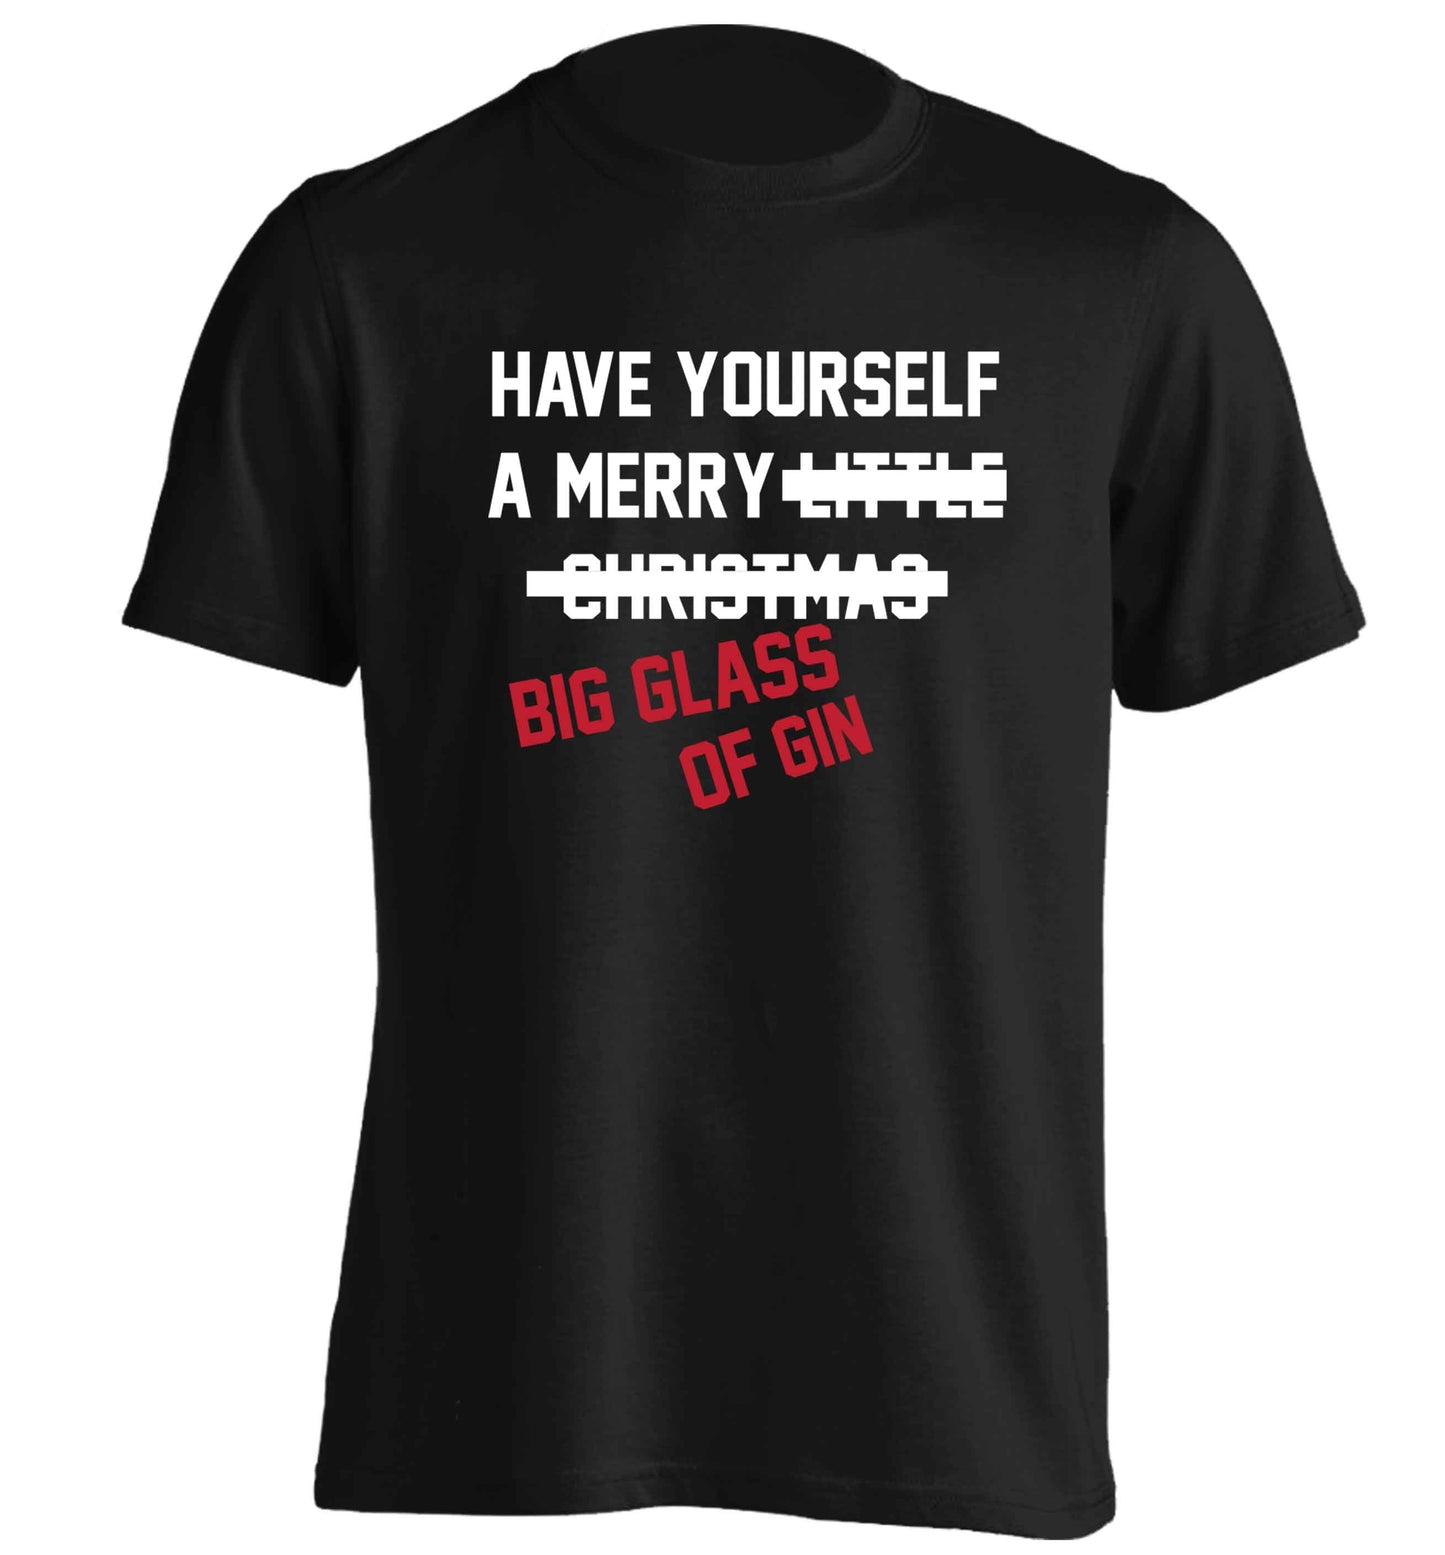 Have yourself a merry big glass of gin adults unisex black Tshirt 2XL